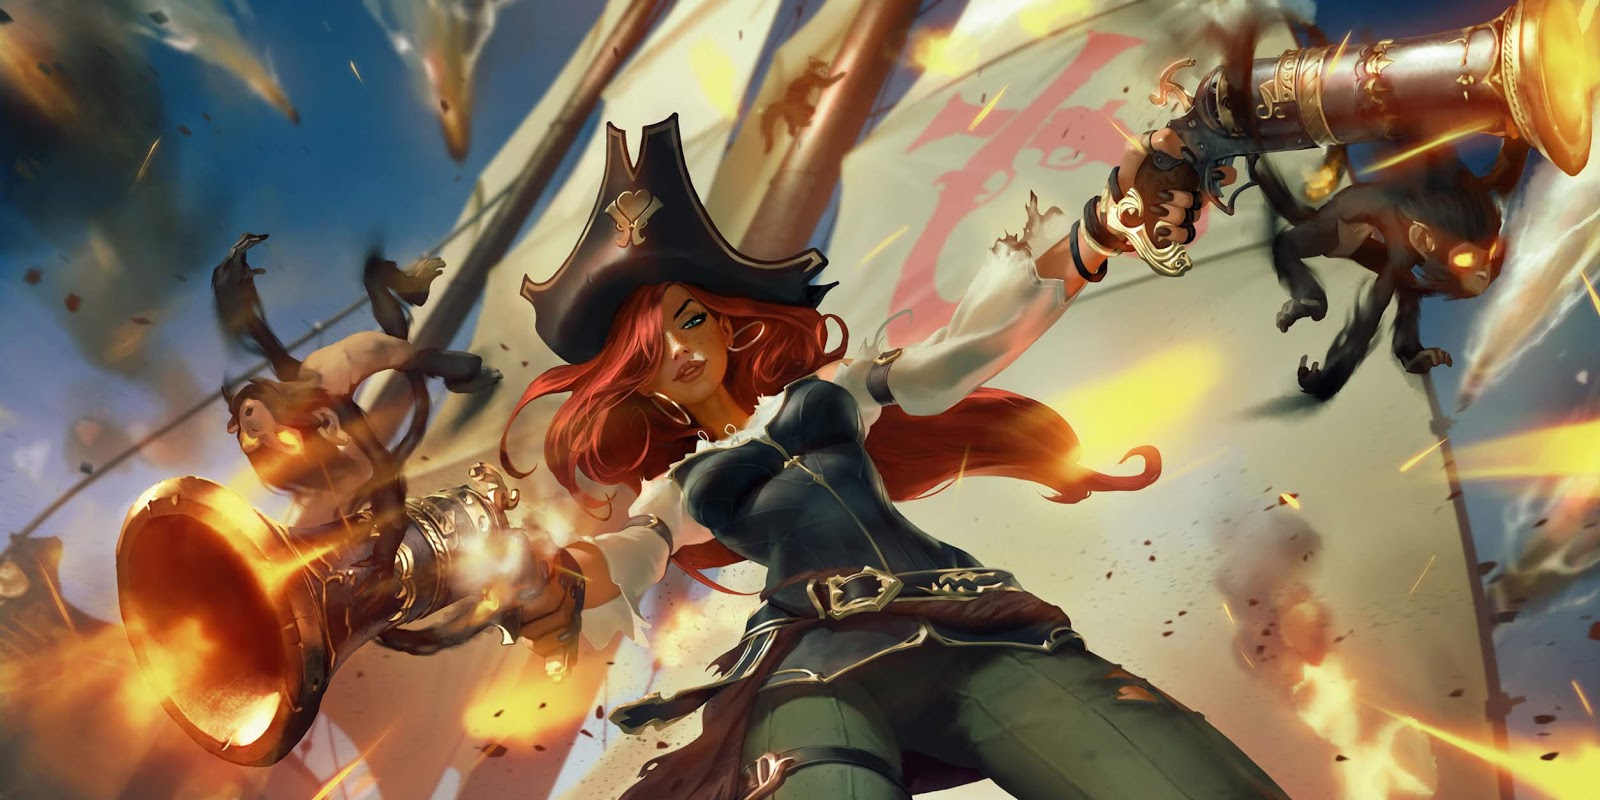 Miss Fortune and Illaoi League of Legends Wallpapers